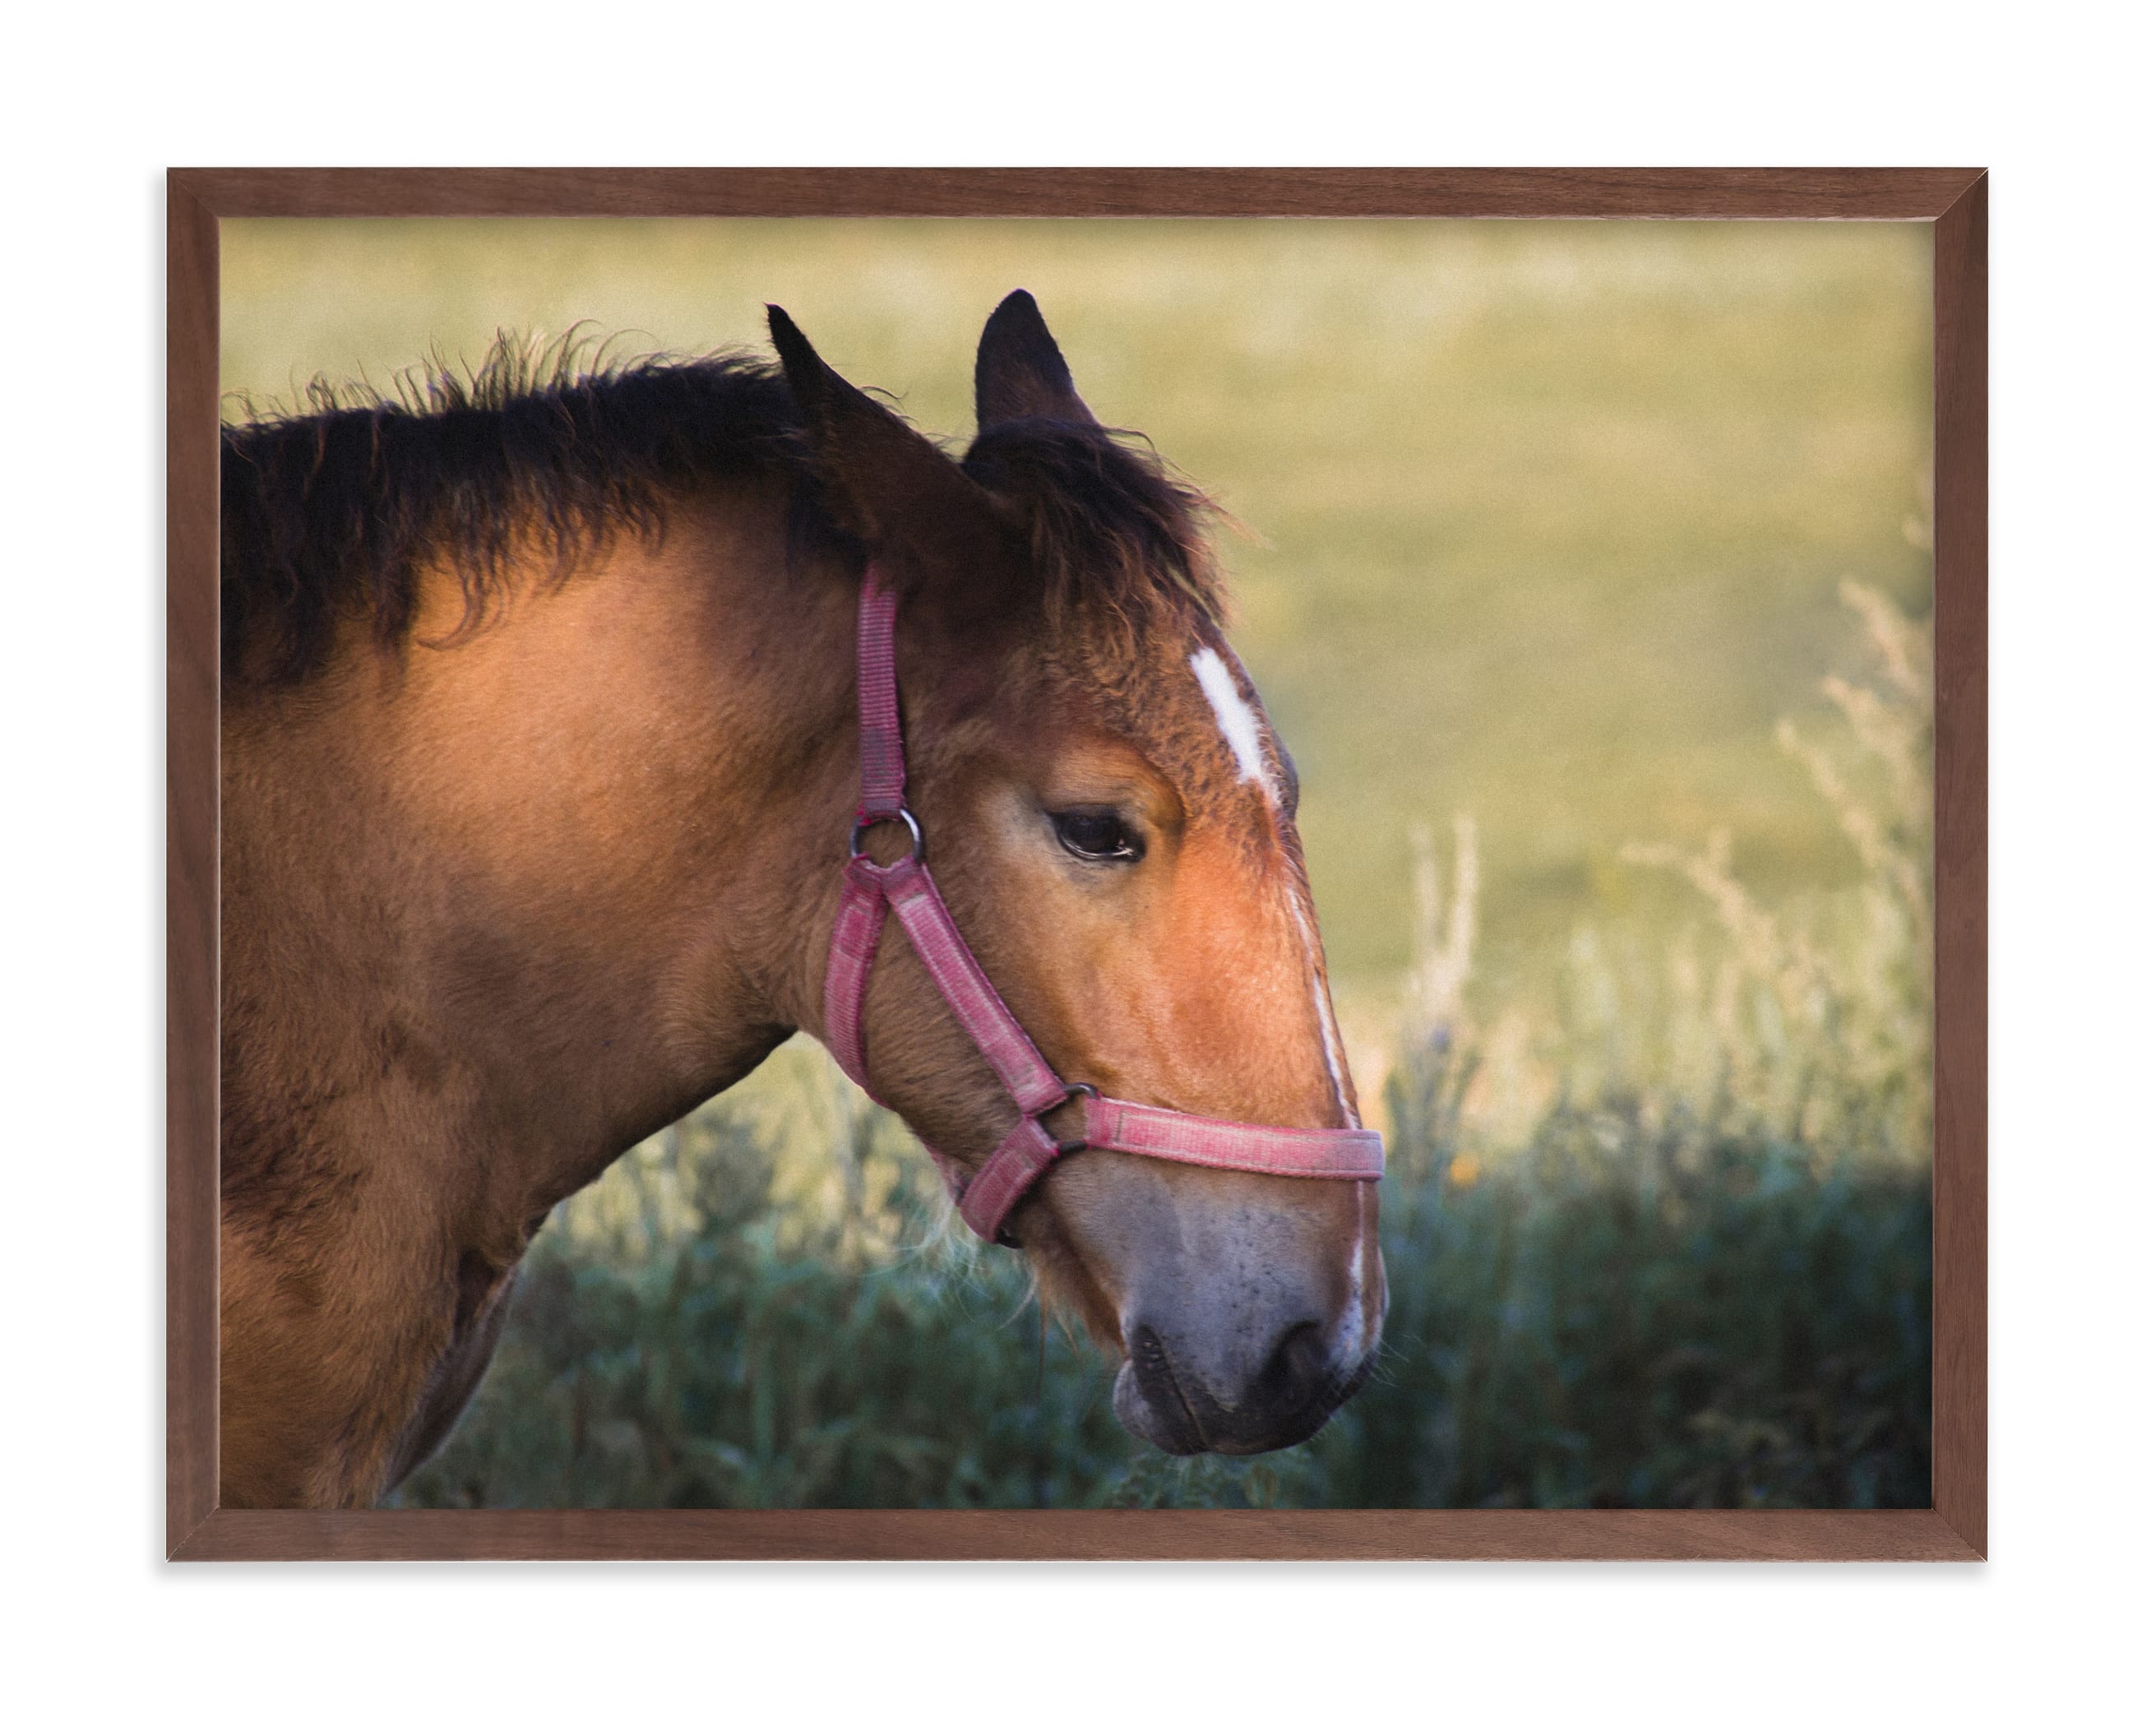 " Golden chestnut" by Lying on the grass in beautiful frame options and a variety of sizes.